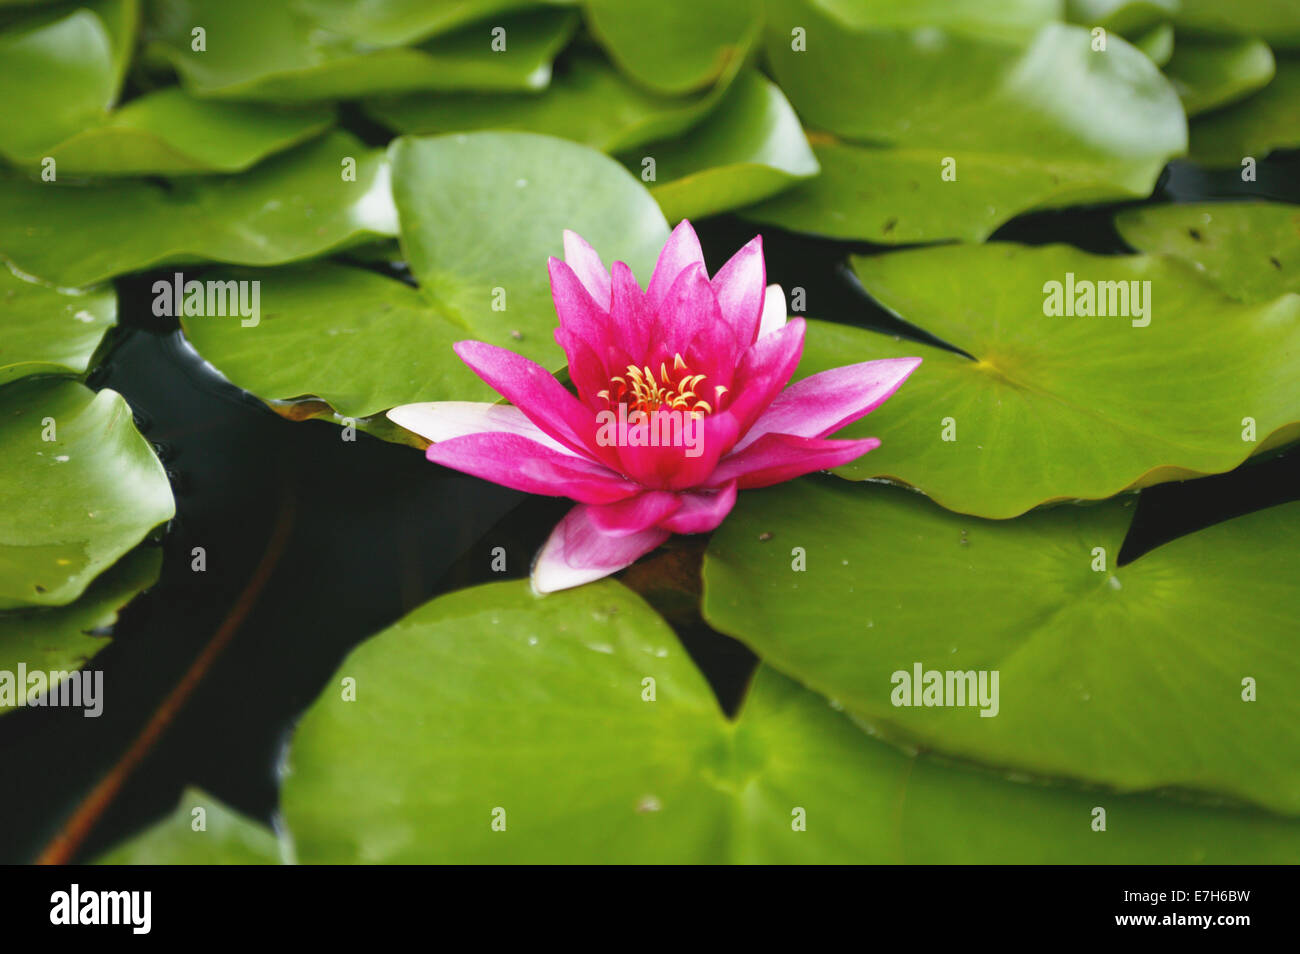 A dark pink lily flower amongst lily pads in a pond. Stock Photo